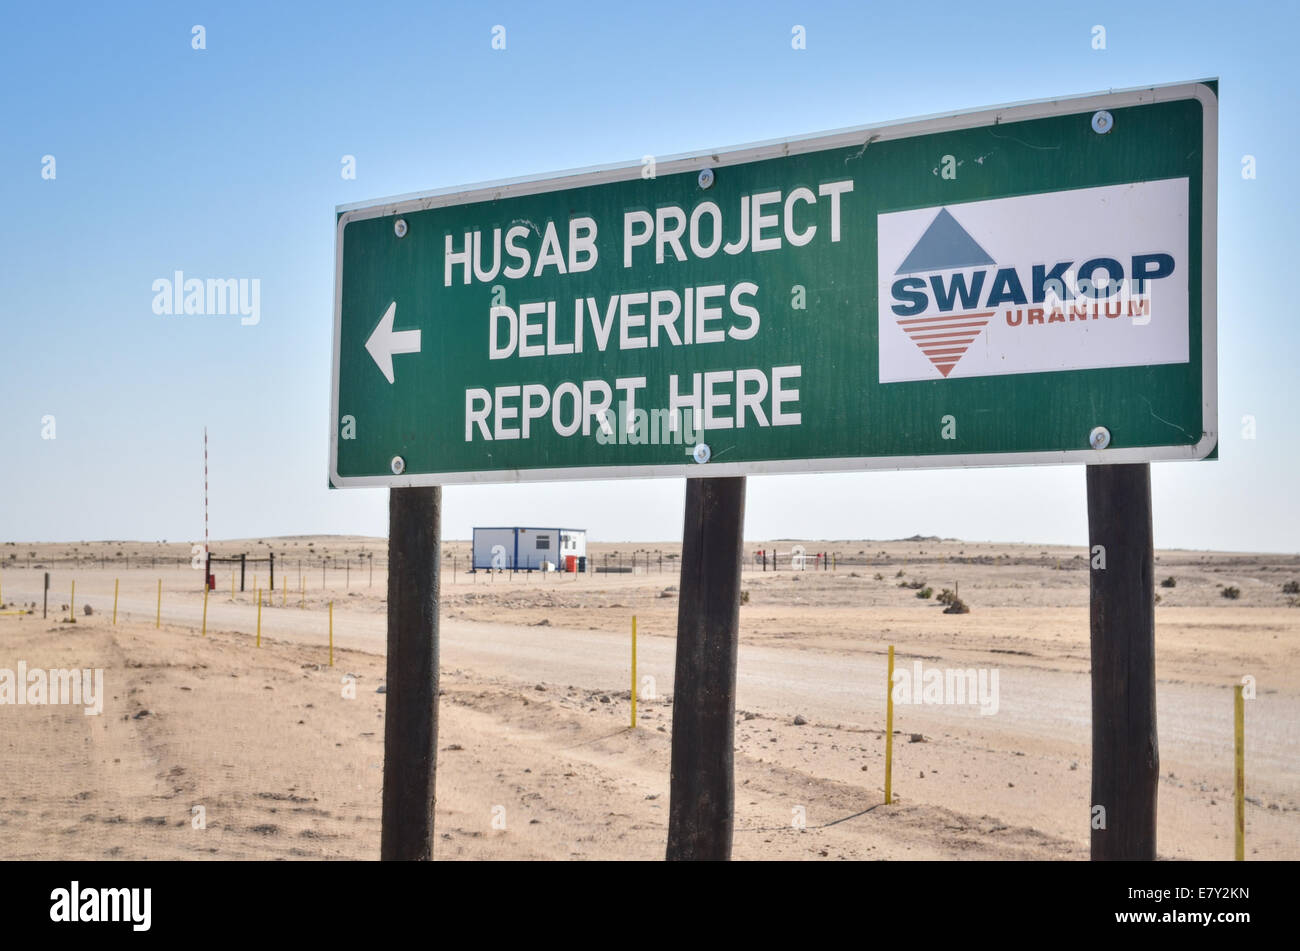 Deliveries to the Husab project (uranium exploration and mining) operated by SwakopUranium (Chinese owned), Namib desert Namibia Stock Photo